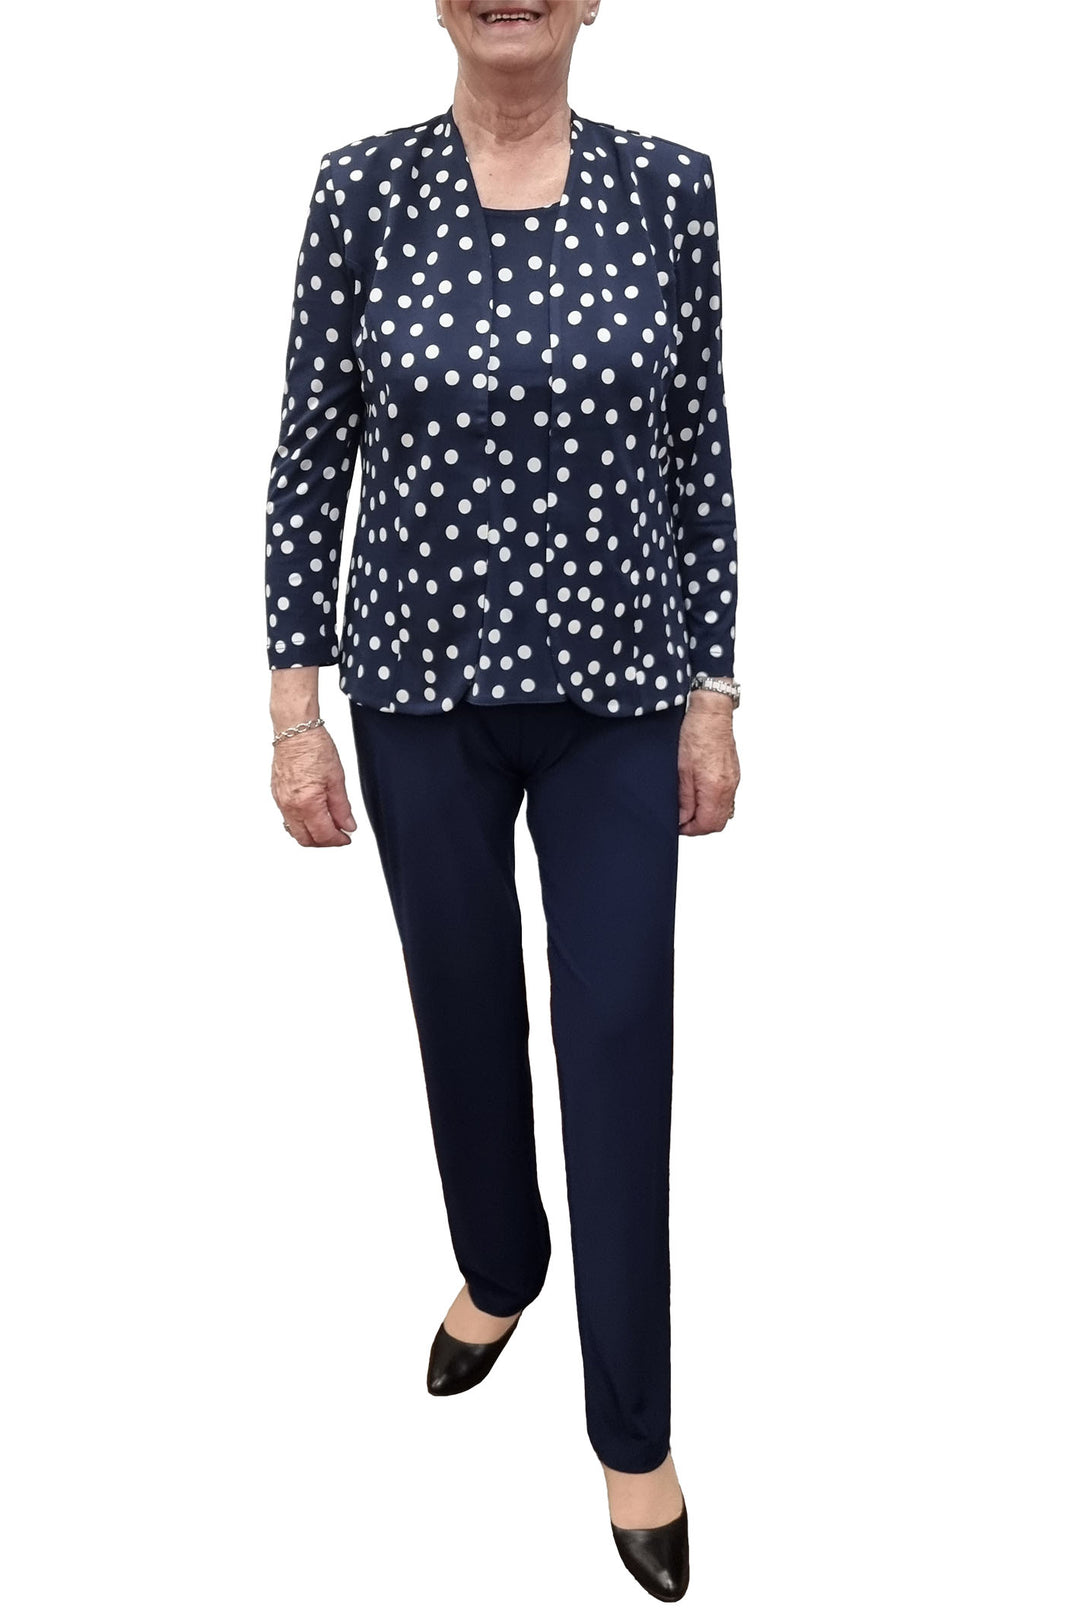 Georgede M37020 P441 Lea Navy Polka Dot Jersey Twinset - Shirley Allum Boutique